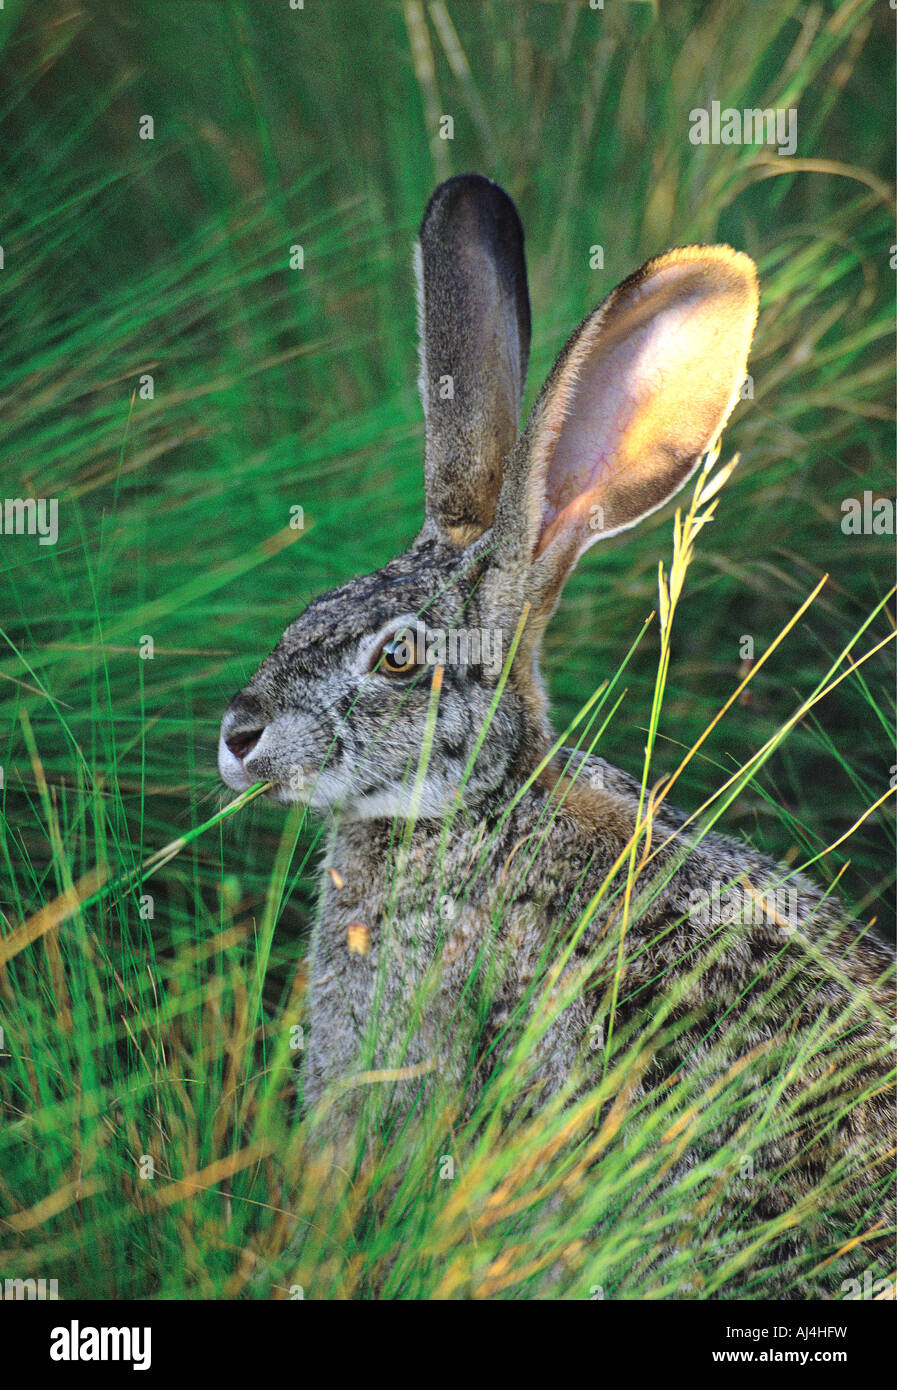 Alert African Cape Hare sitting in long grass with its ears up Helderberg Nature Reserve Somerset West South Africa Stock Photo